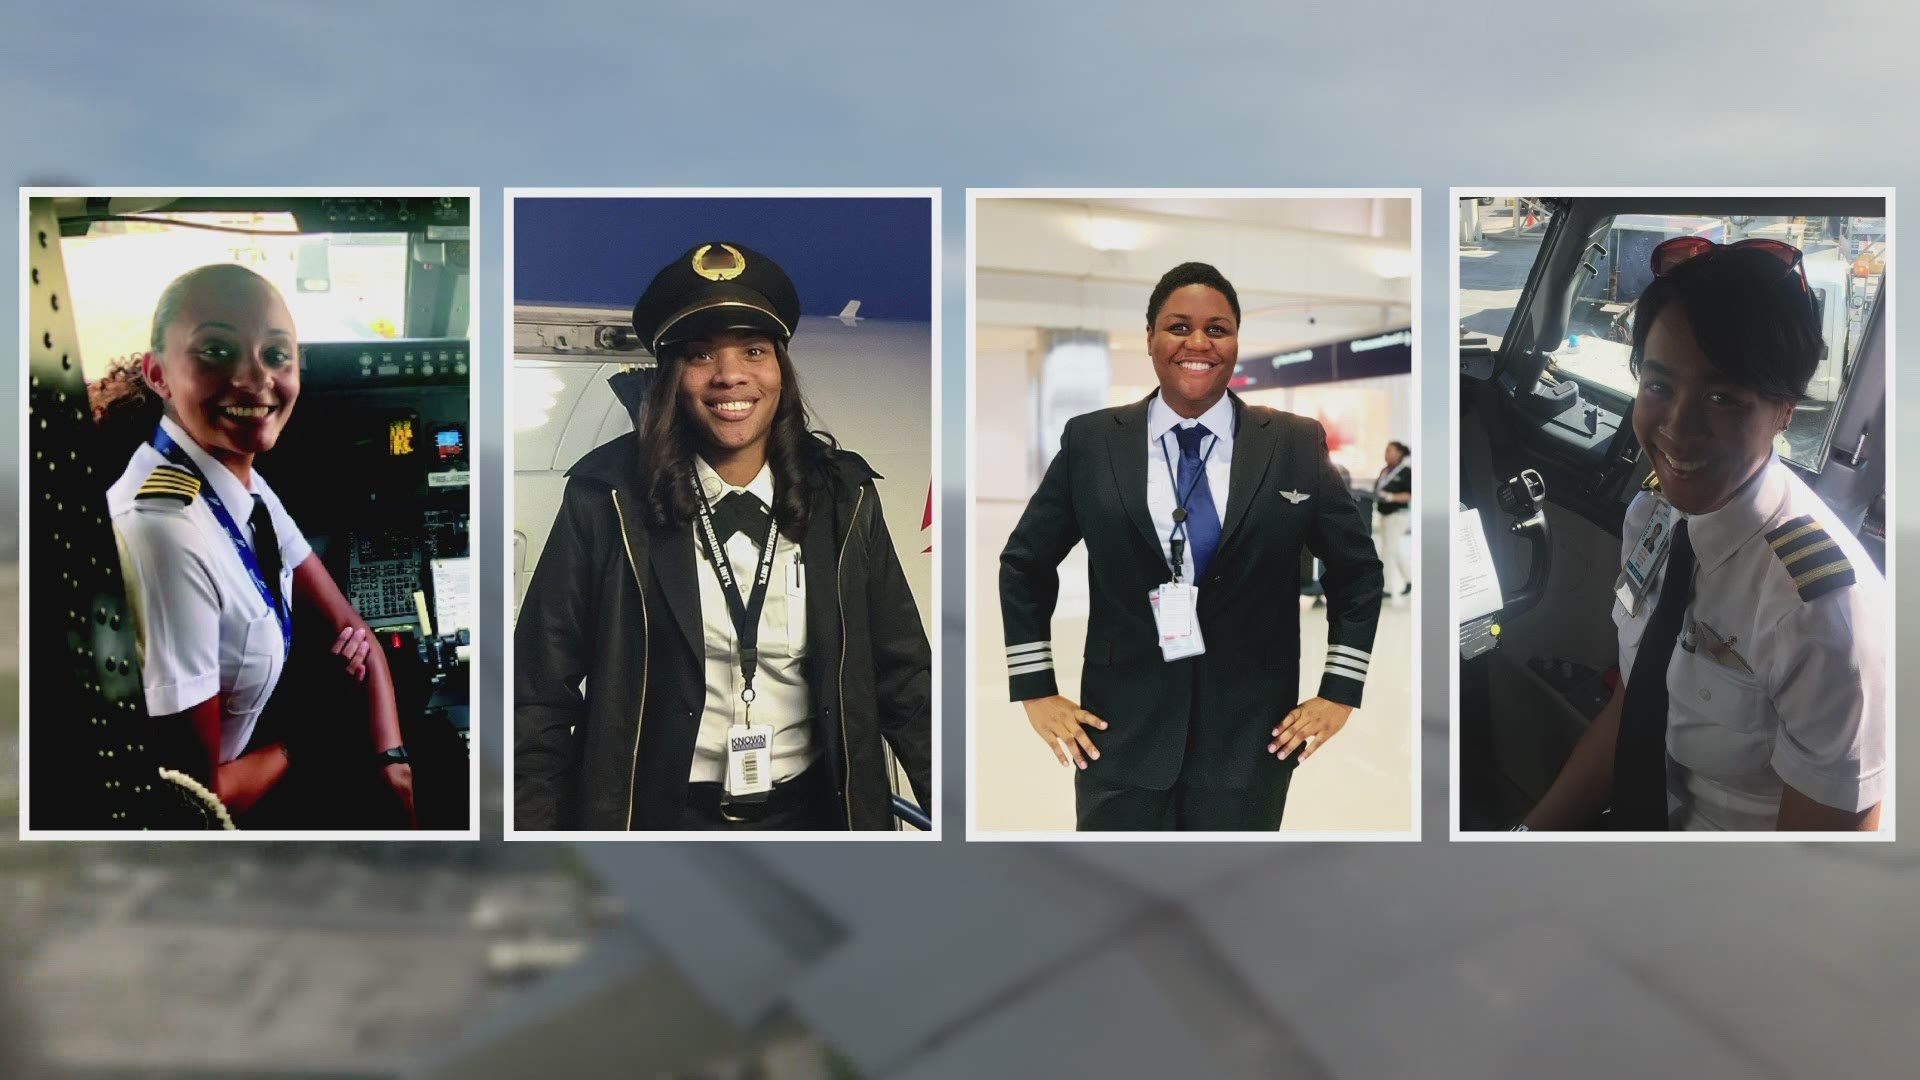 Black women represent less than 1/2 of 1% of commercial pilots in the U.S. Monique Grayson, Micah Clark, Alexis Brown and Brianna Jackson are changing the paradigm.